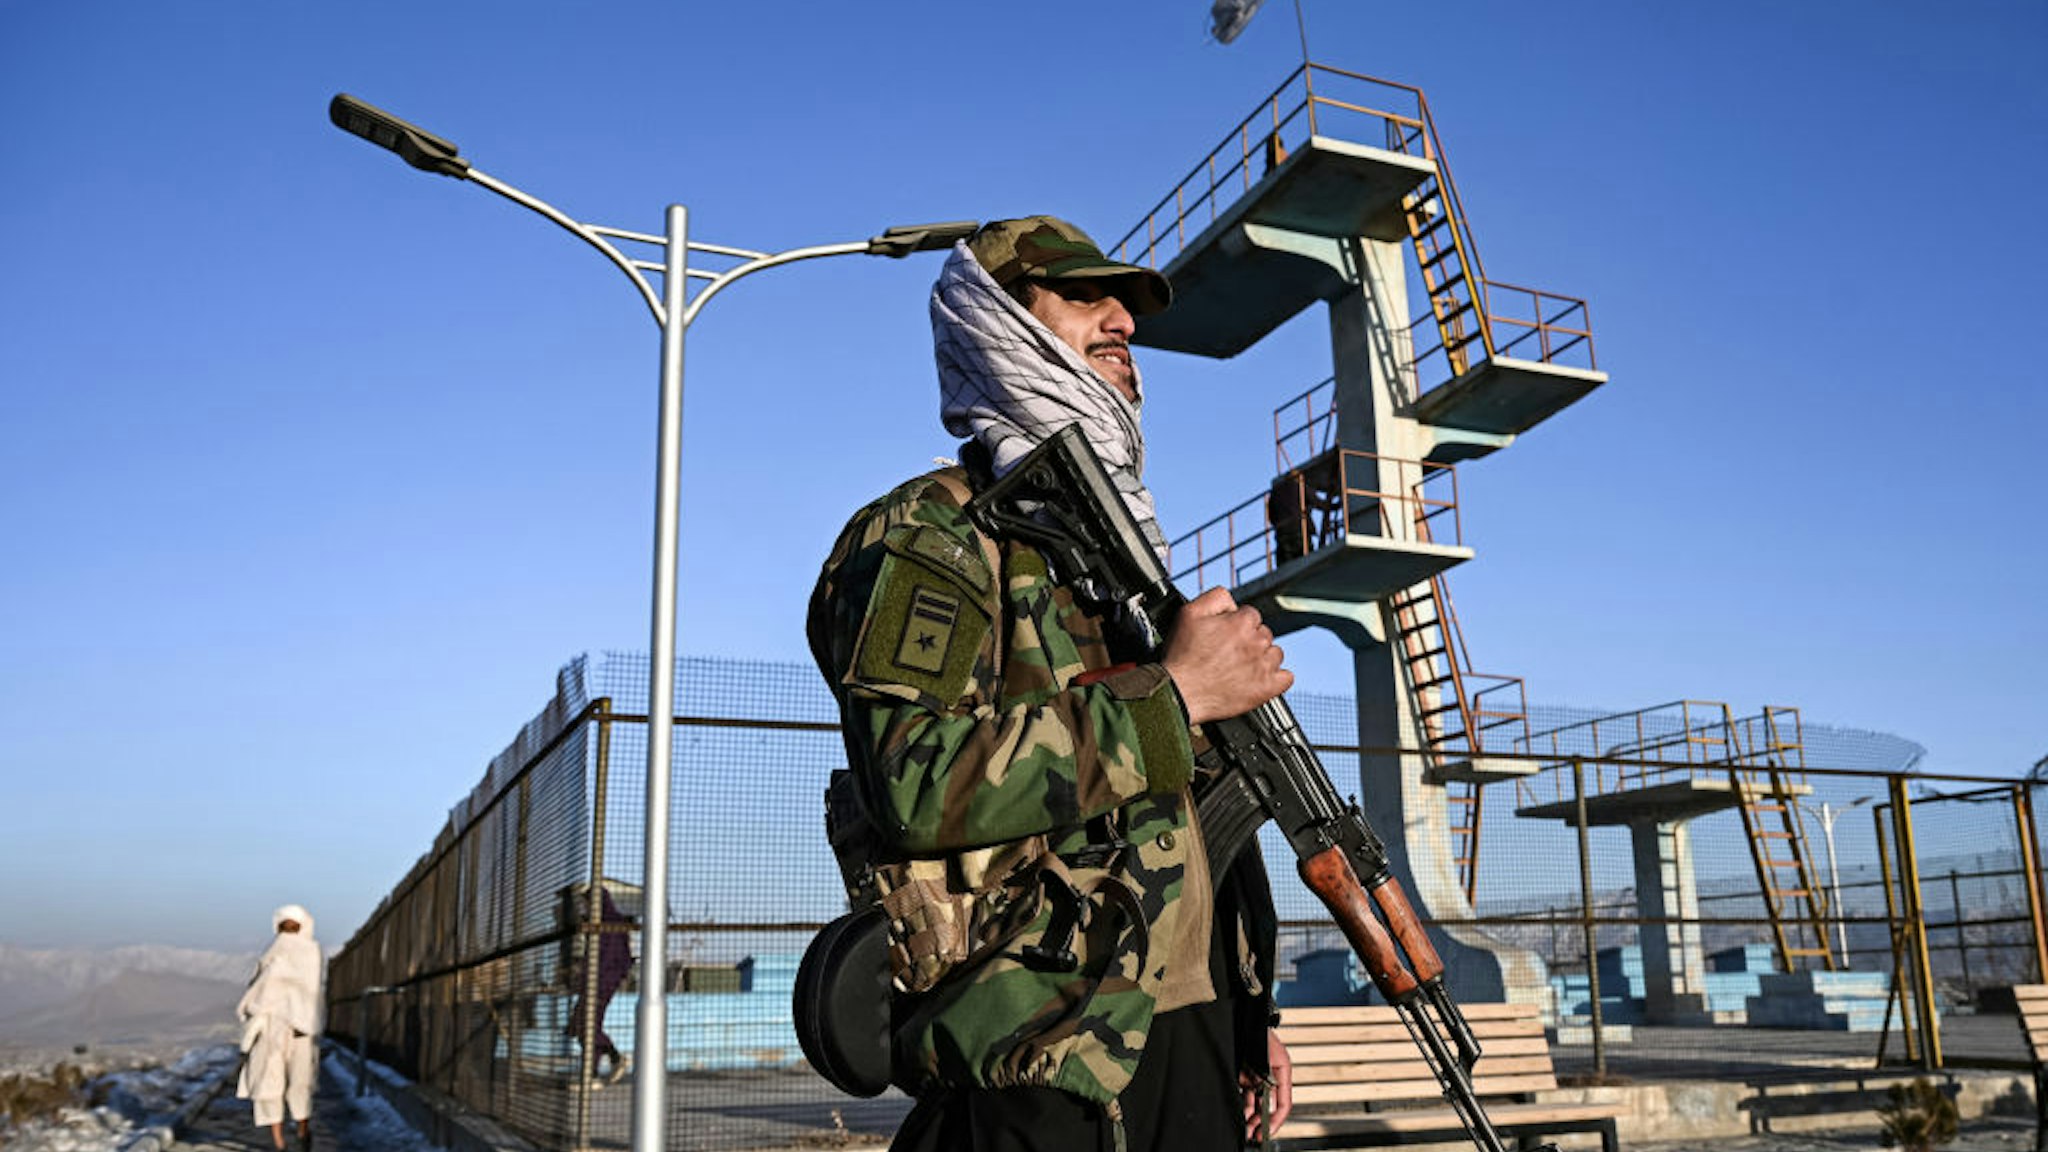 A Taliban fighter stands guard at the Wazir Akbar Khan hill in Kabul on January 31, 2022.